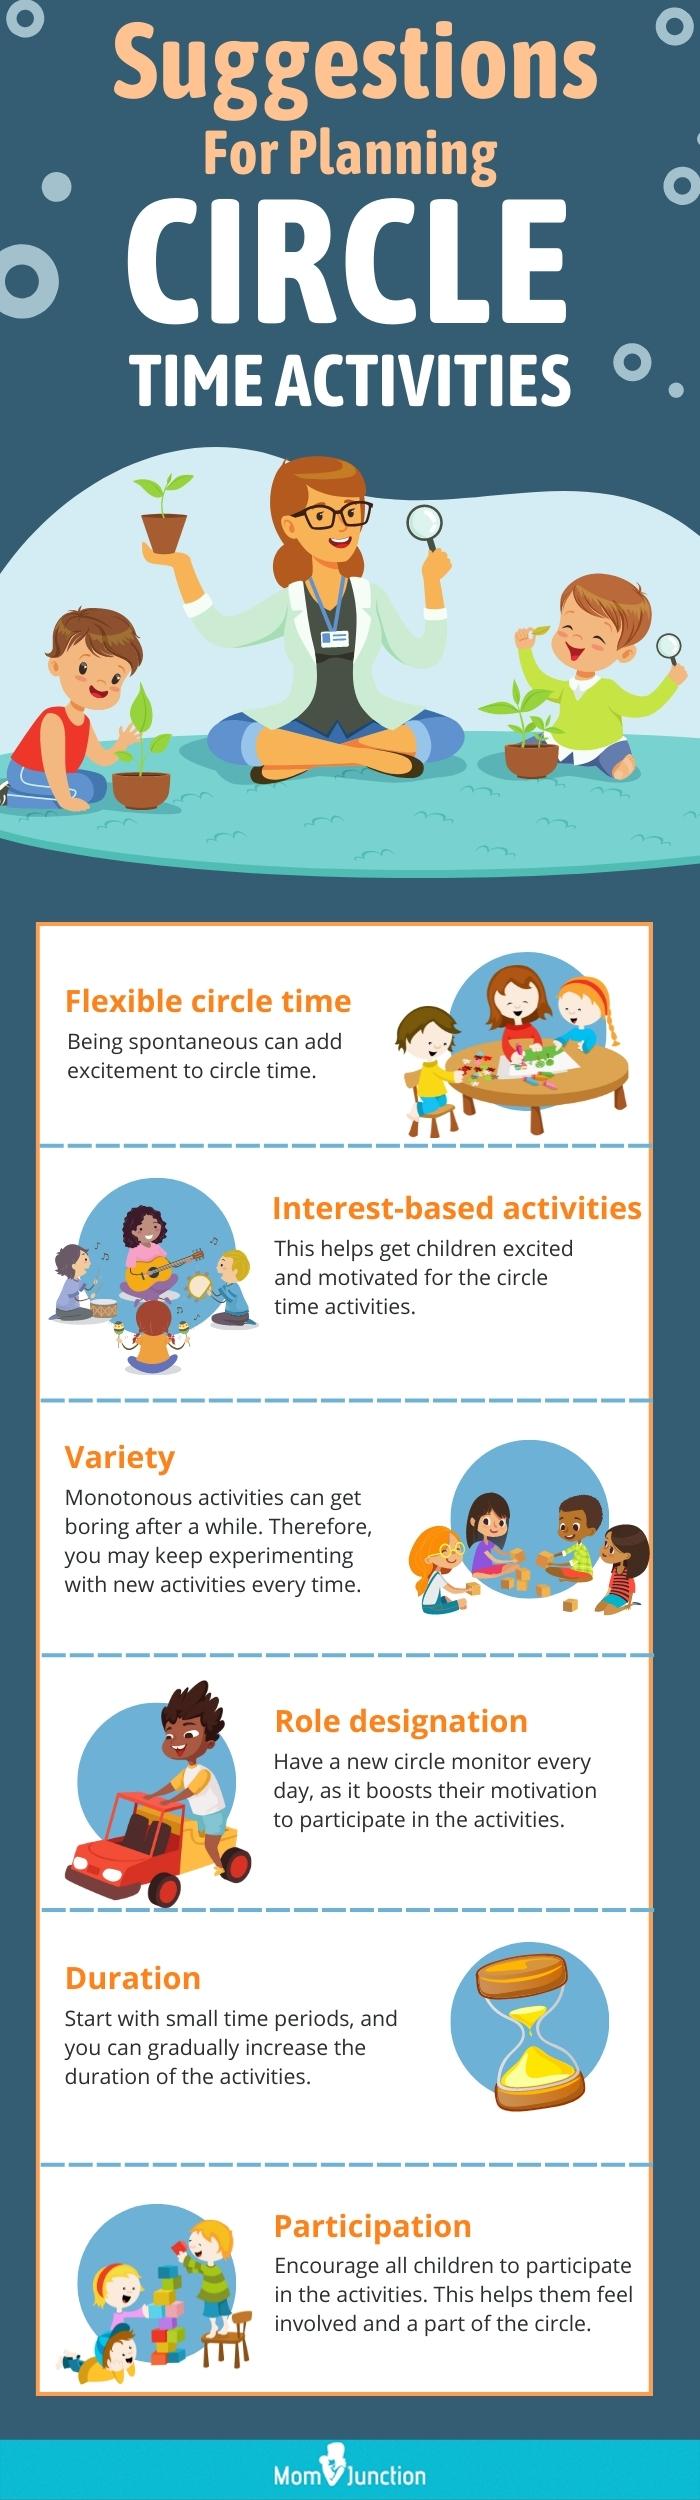 suggestions for planning circle time activities (infographic)